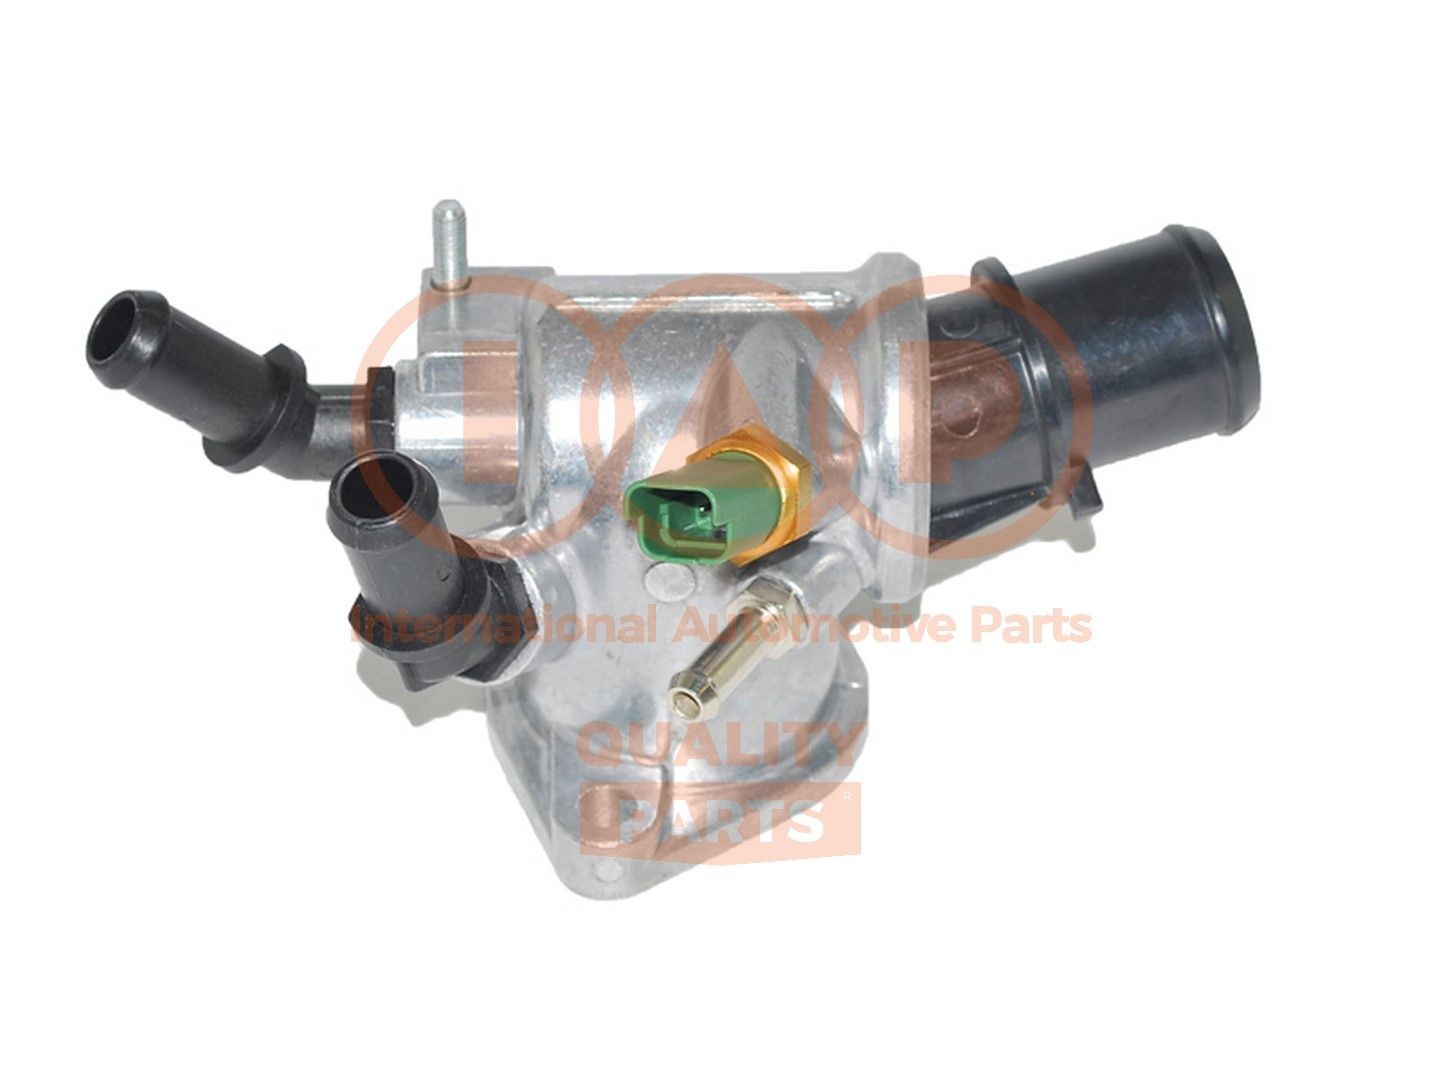 IAP QUALITY PARTS 155-16101 Engine thermostat 13 38 275